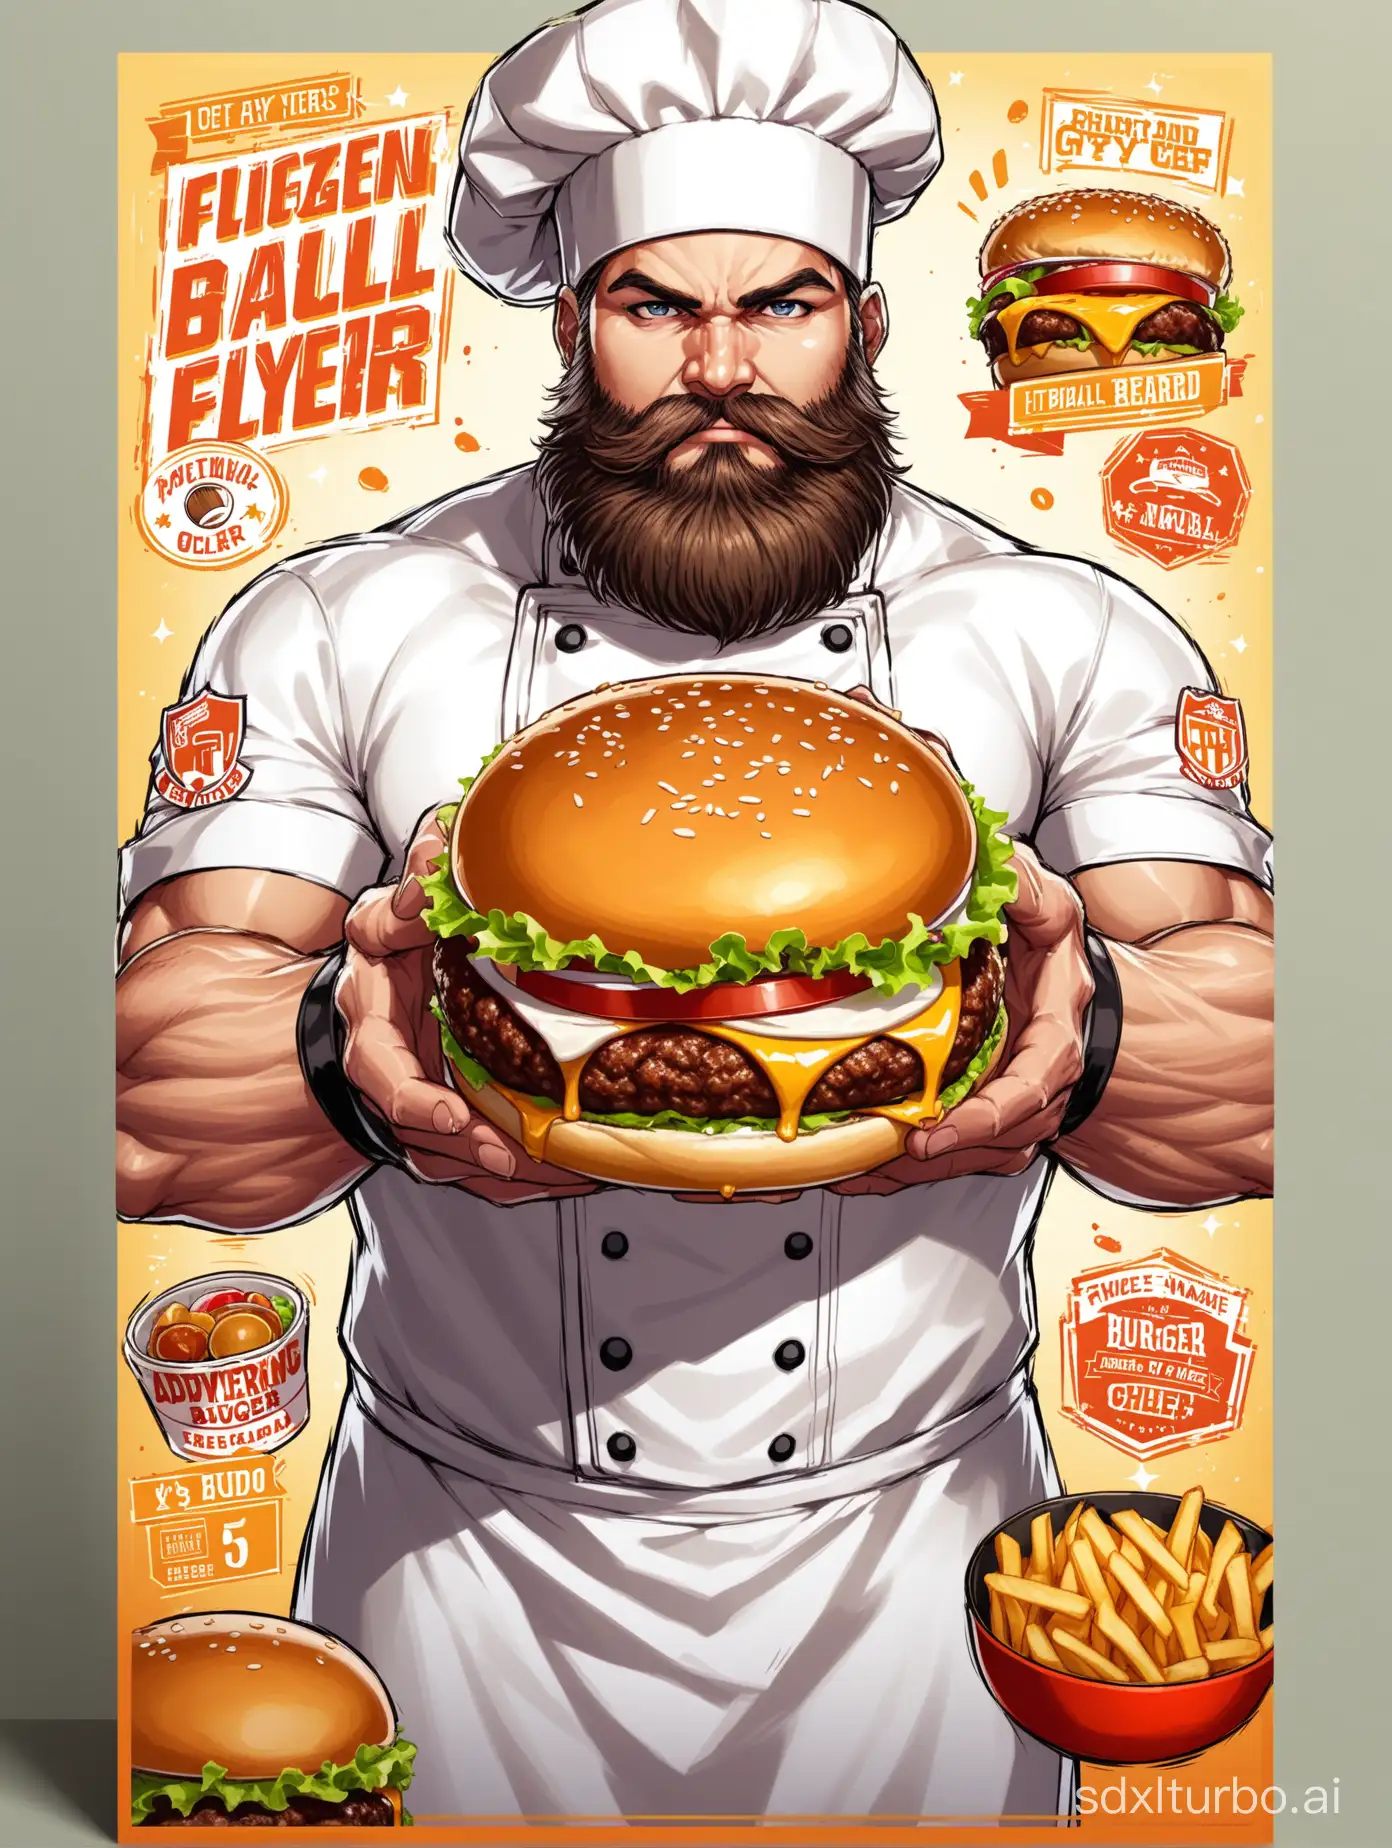 Bearded-Chef-Holding-Burger-and-Football-Advertisement-Flyer-Design